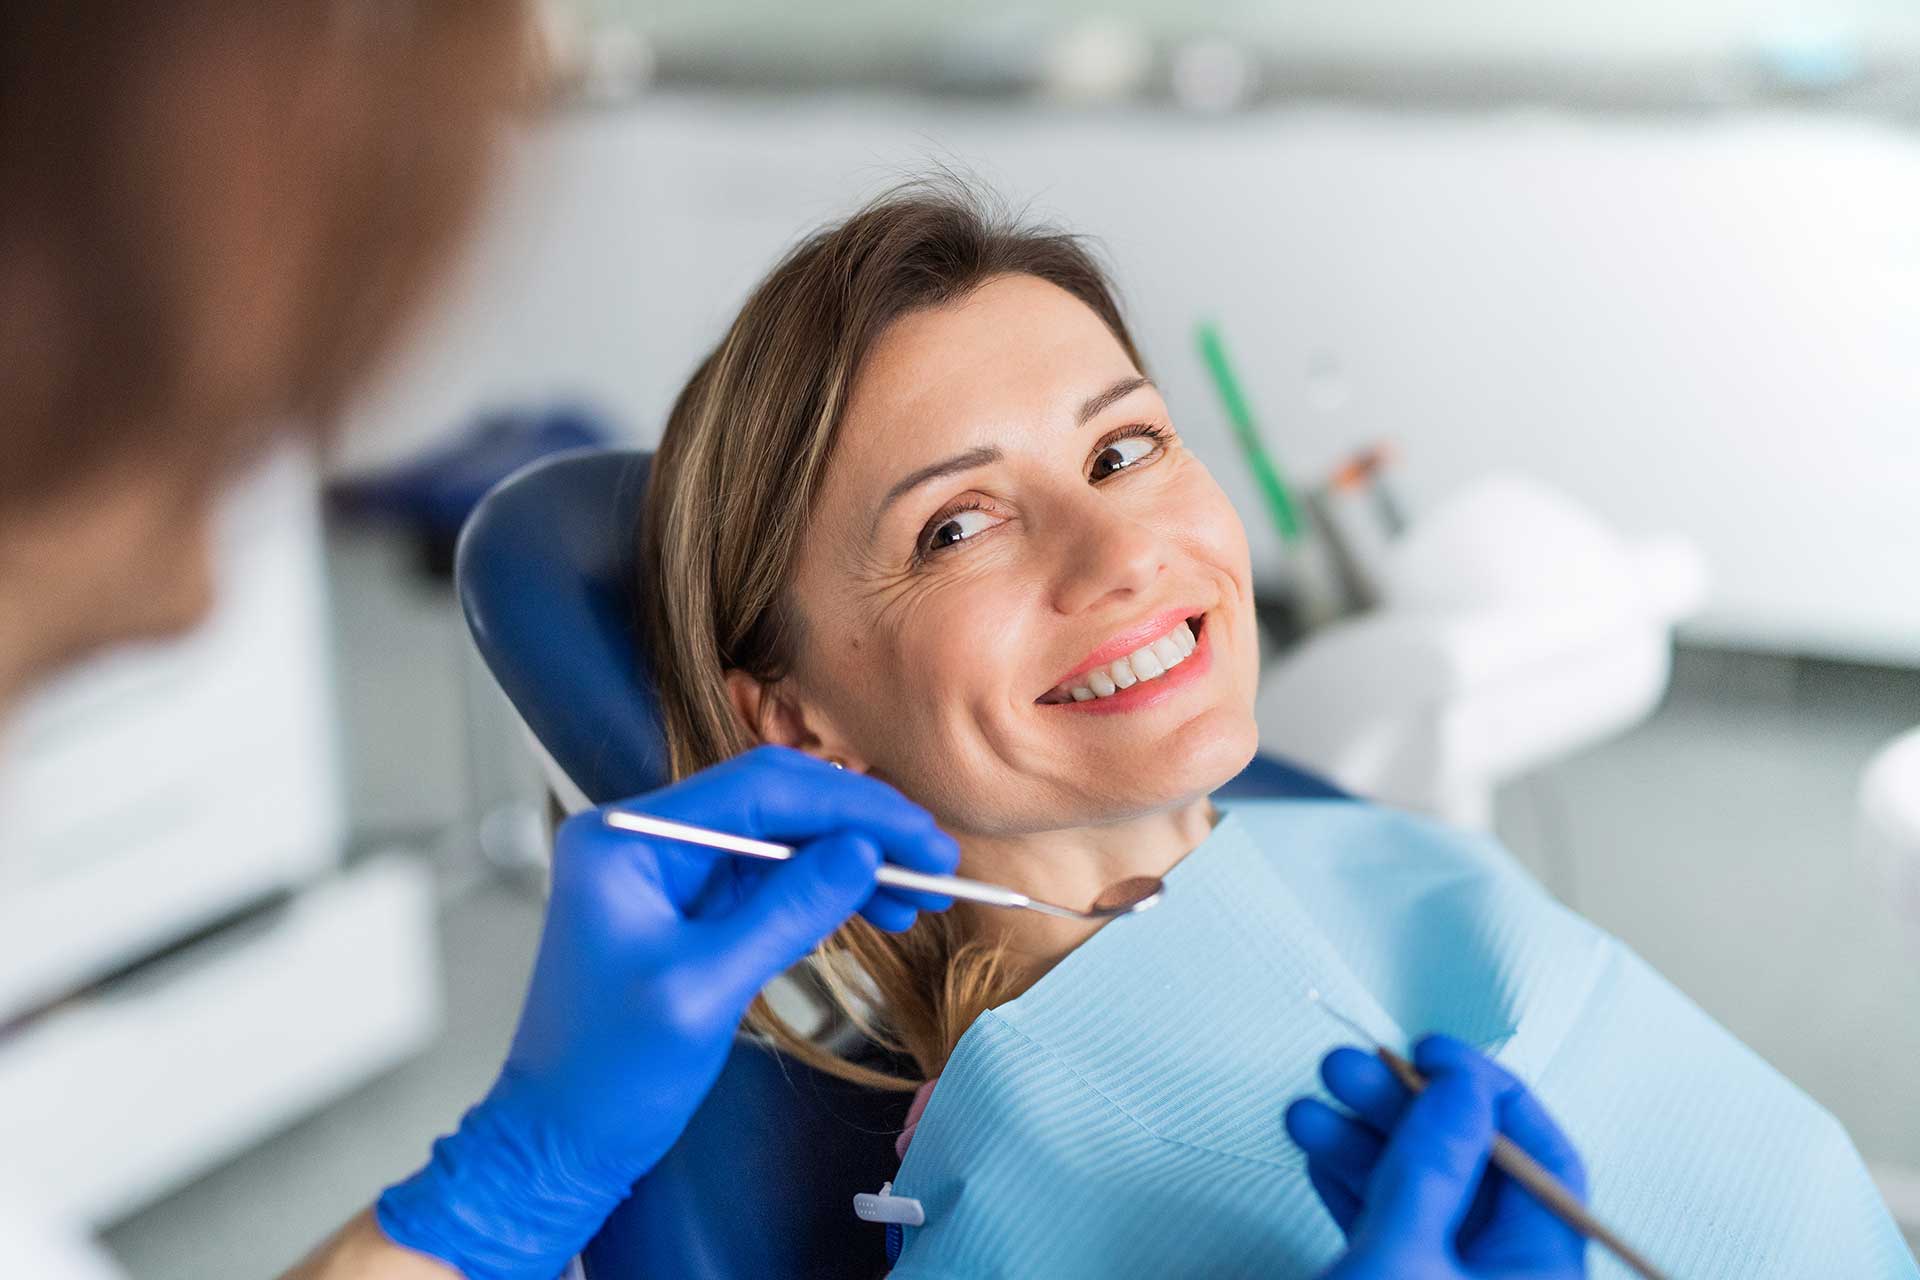 What You Should Know Before Your Dentist: Your Dental Check-Up Guide